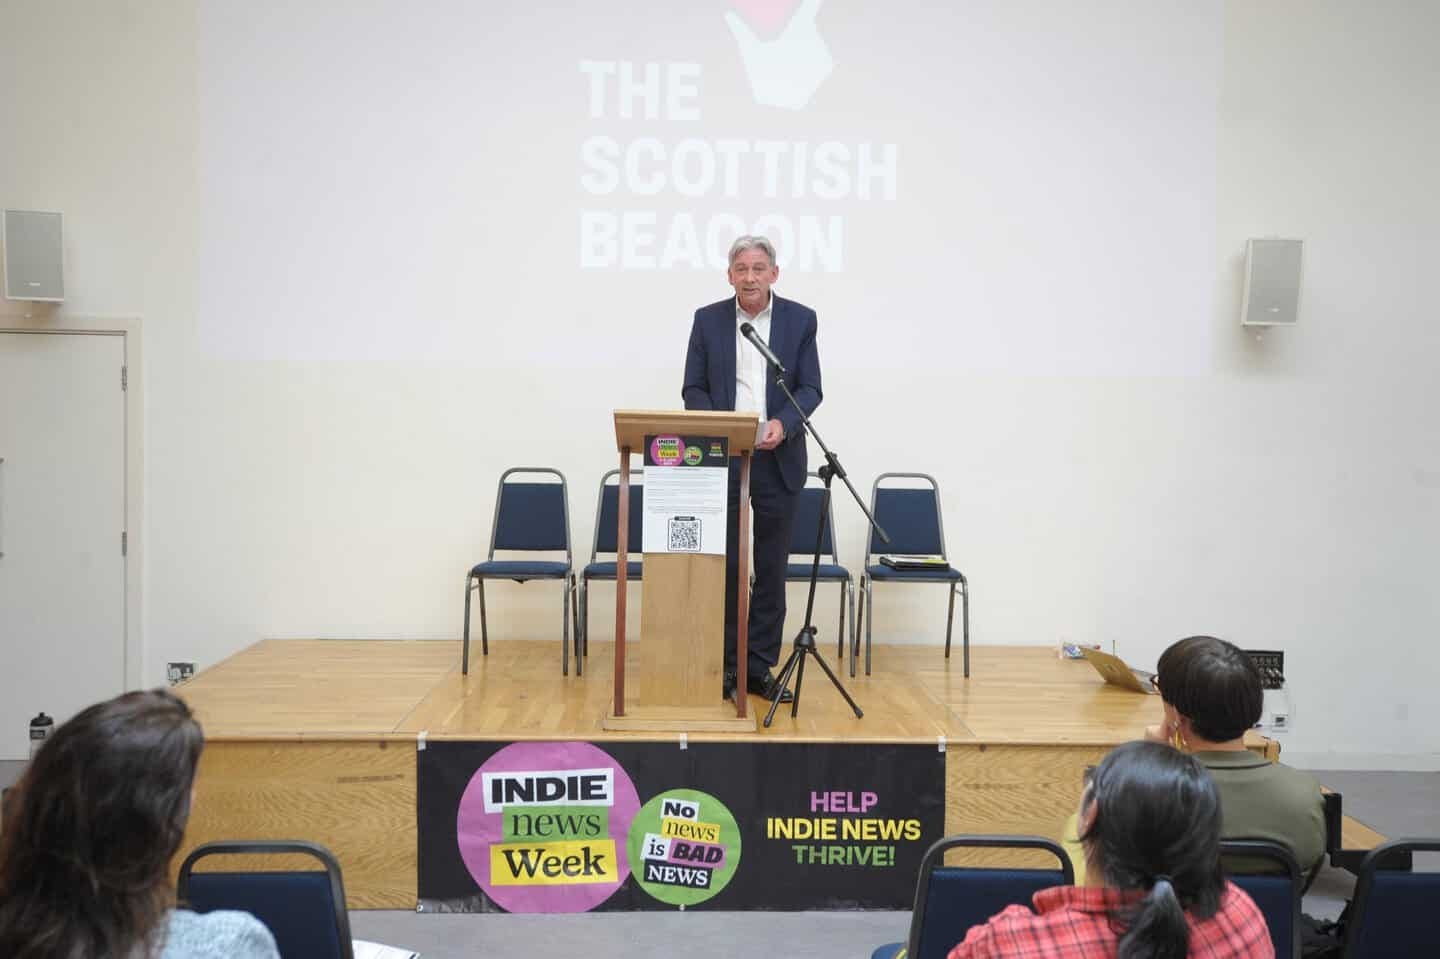 Richard Leonard speaking at the No News Is Bad News event | Photo by Iain McLellan